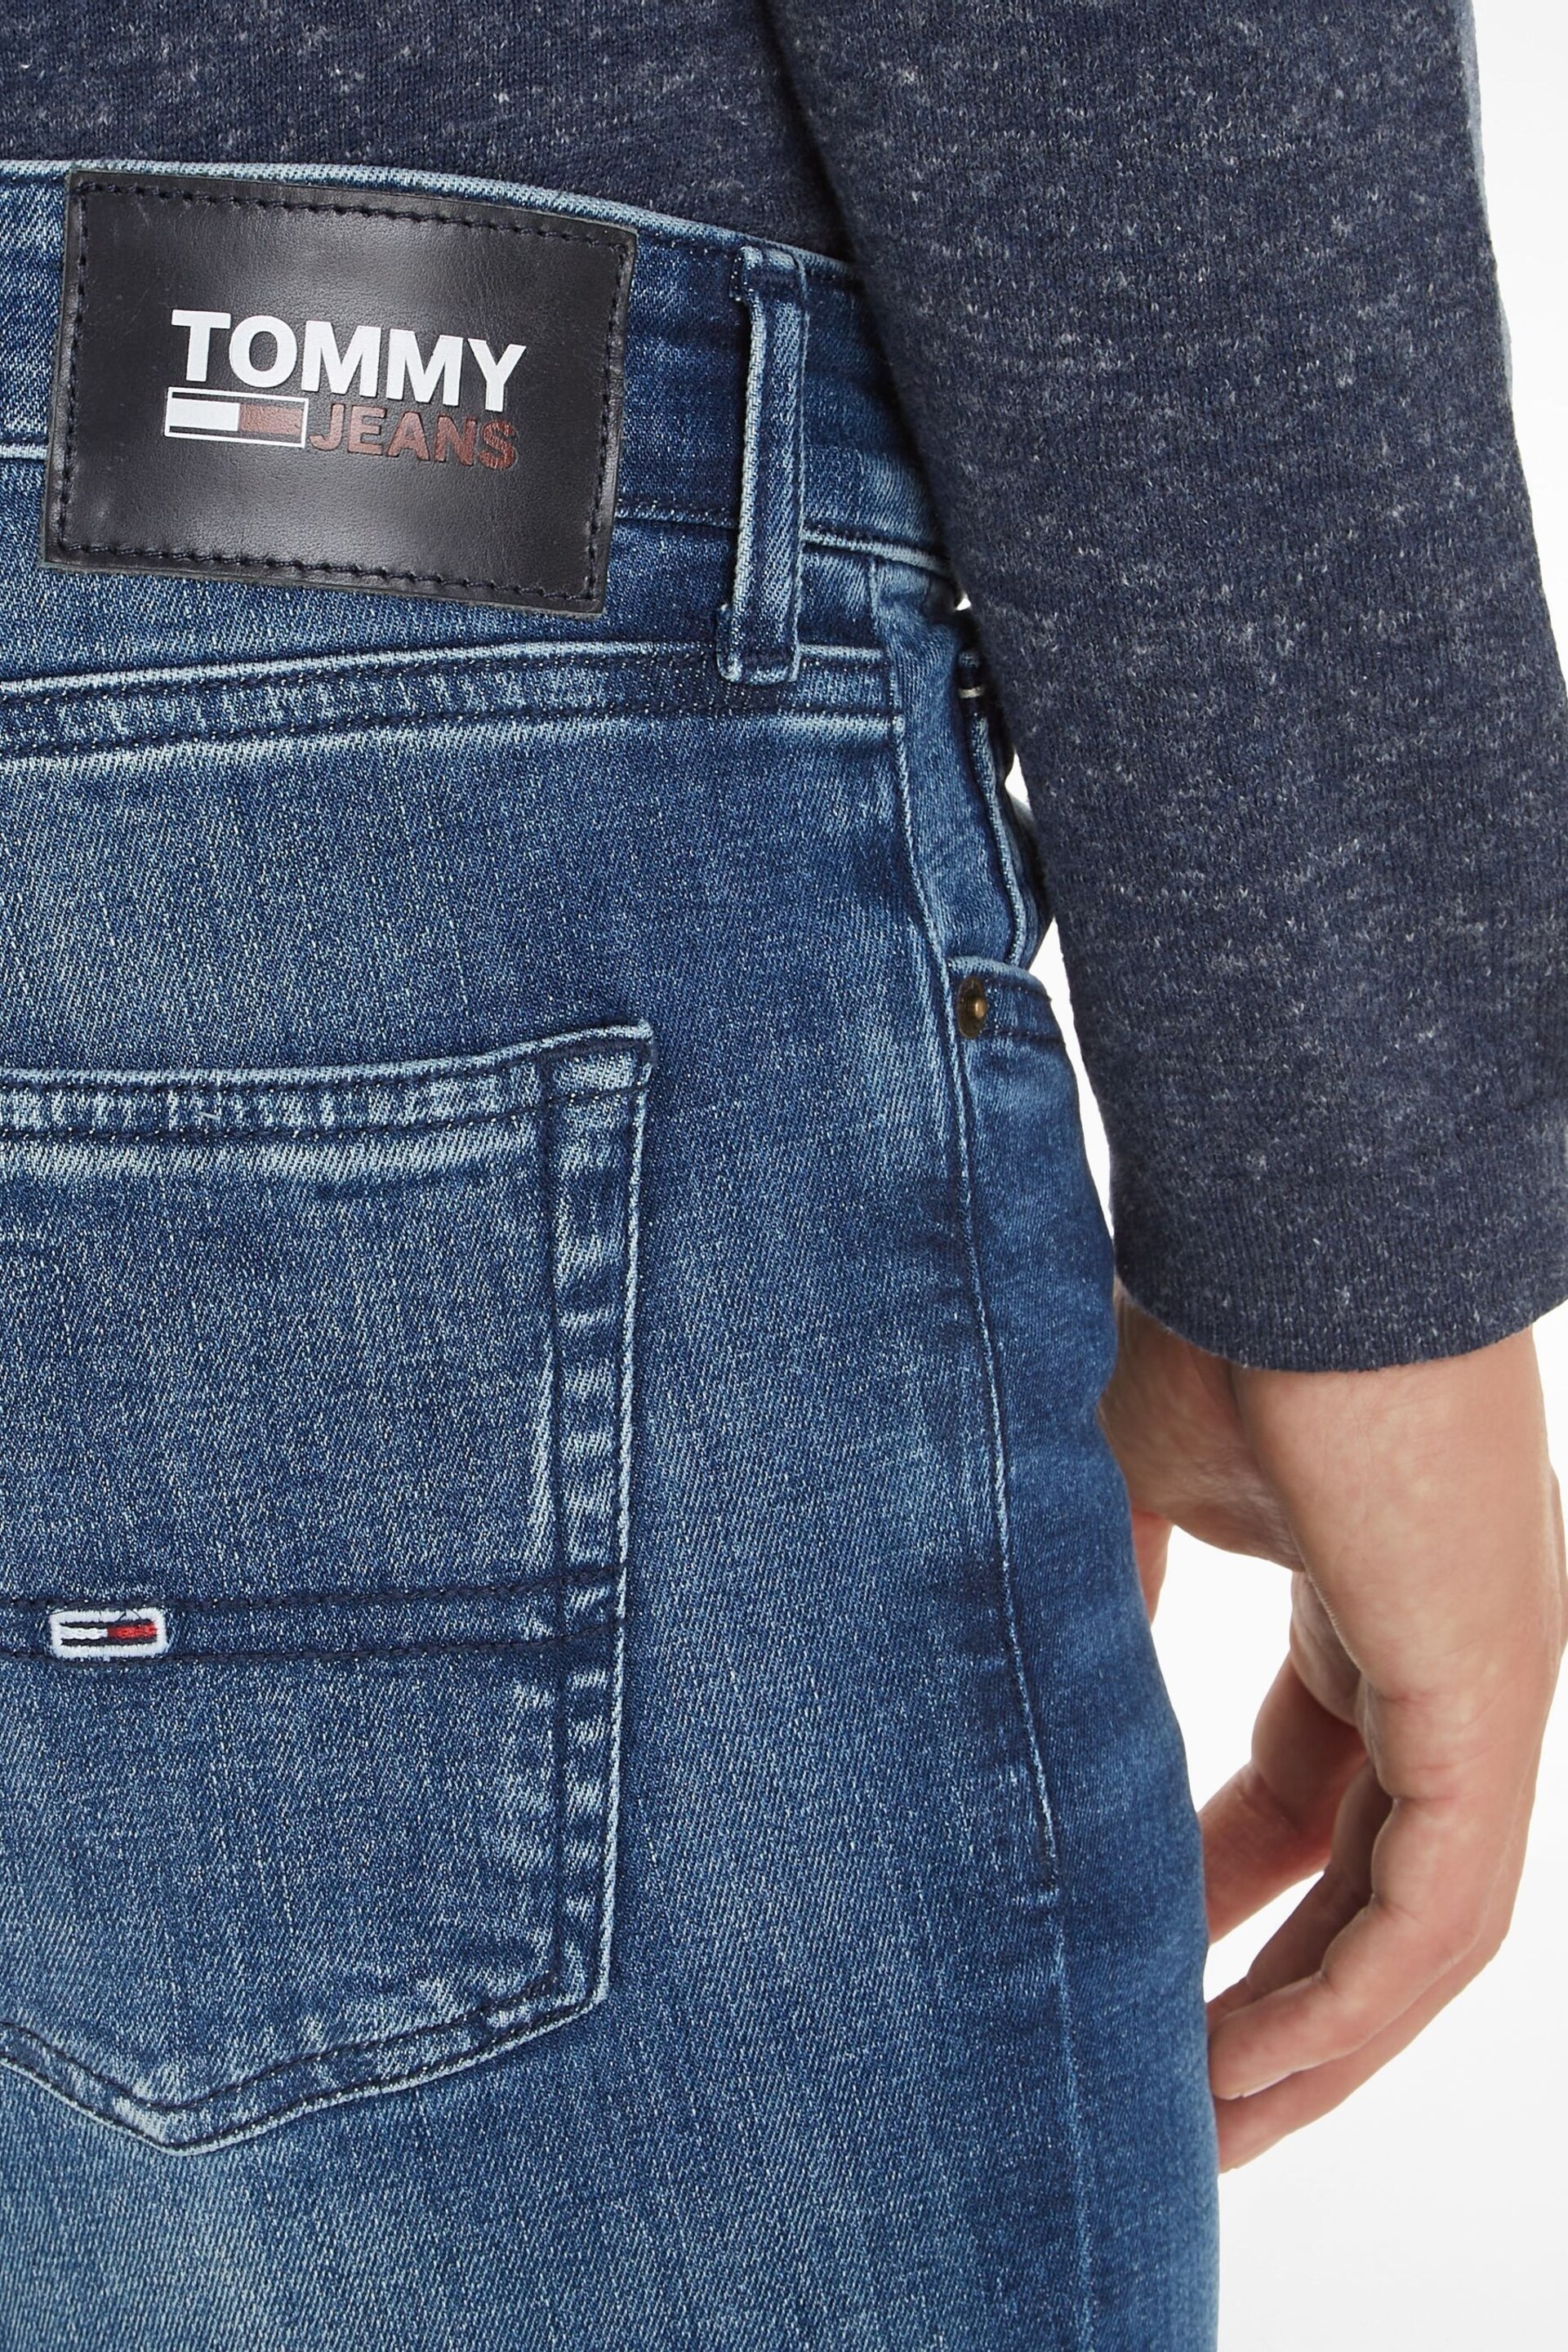 Tommy Jeans Blue Scanton Slim Fit Stretch Jeans - Image 3 of 6